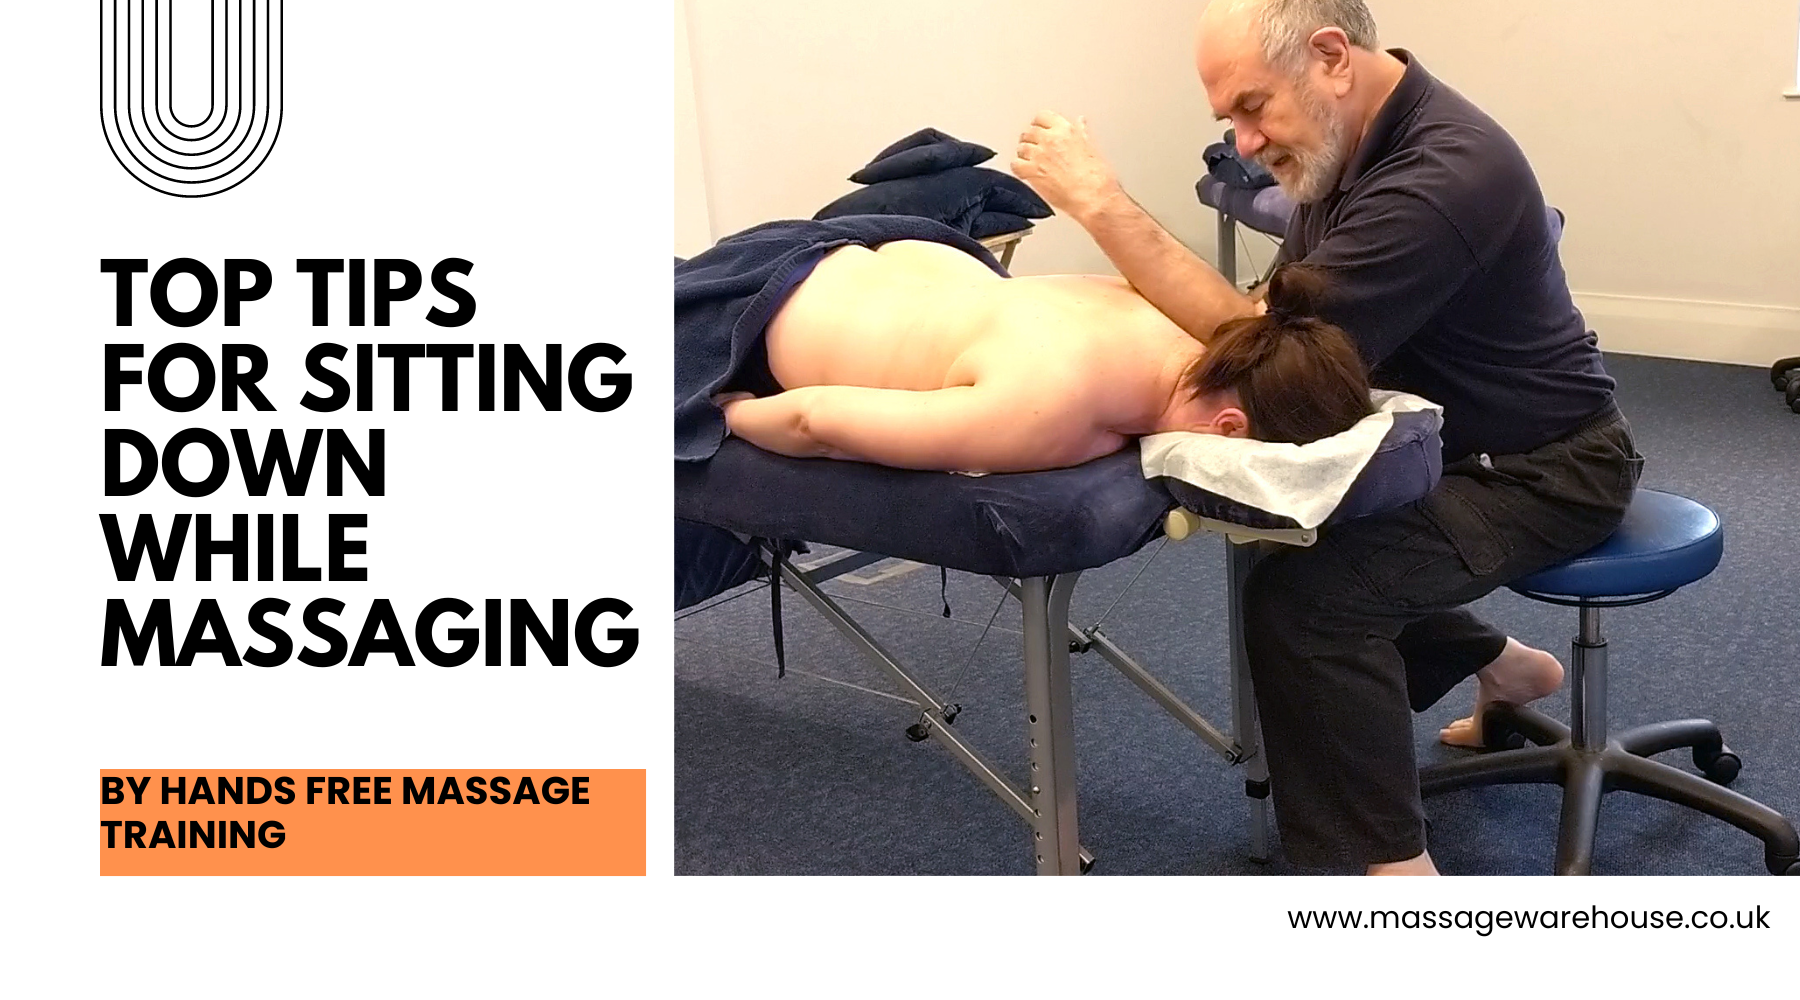 Top Tips for Sitting Down While Massaging